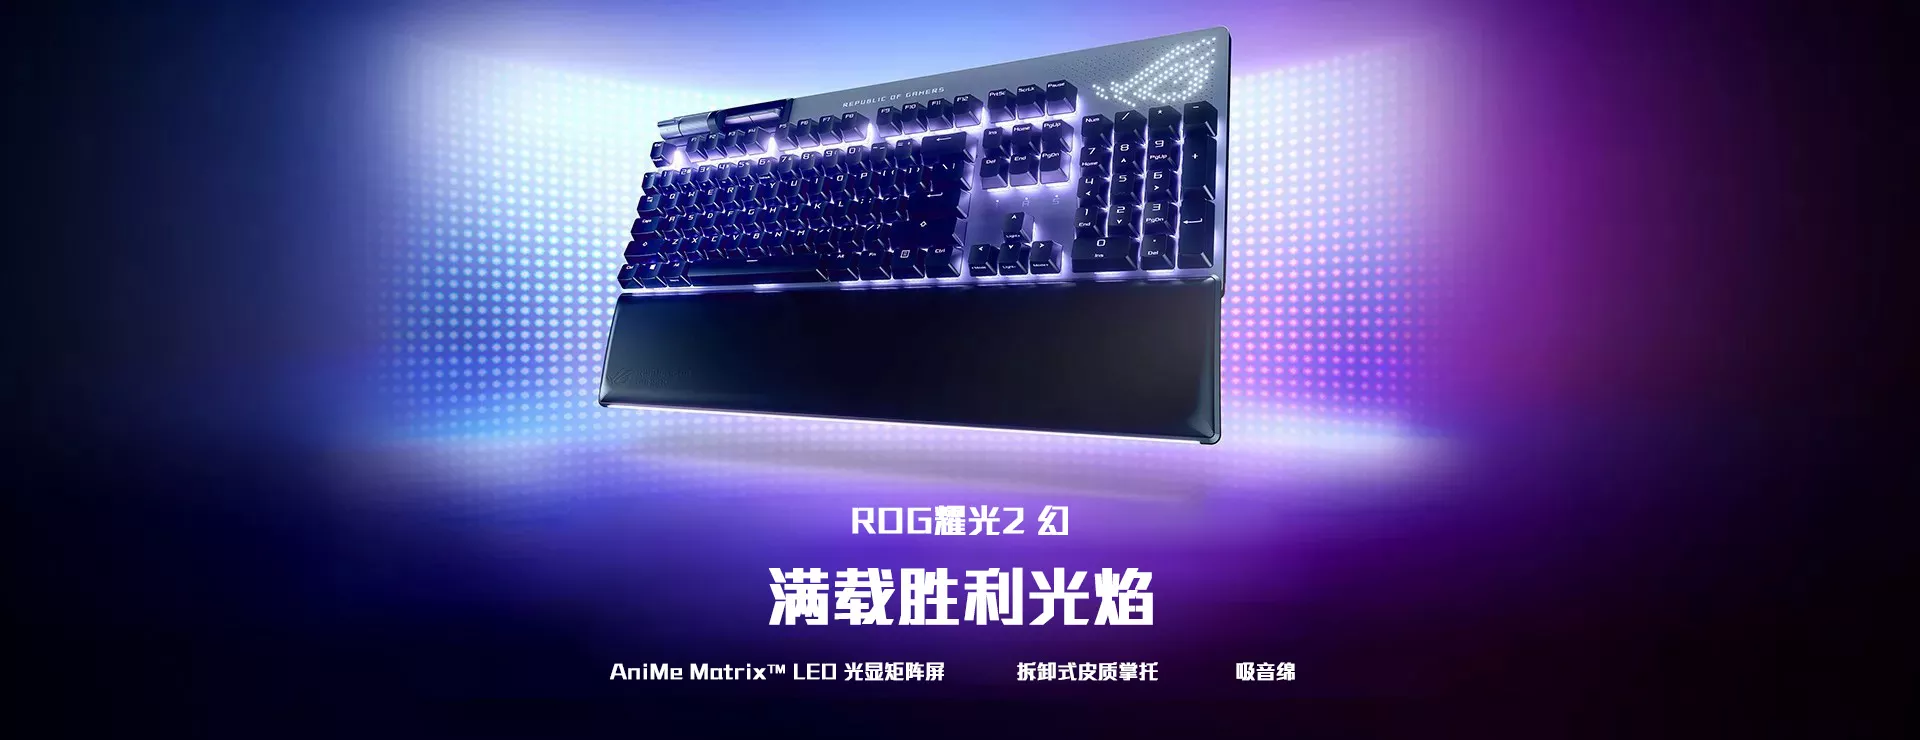 Poster visual of ROG Strix Flare II Animate keyboard in front of a wall of LEDs